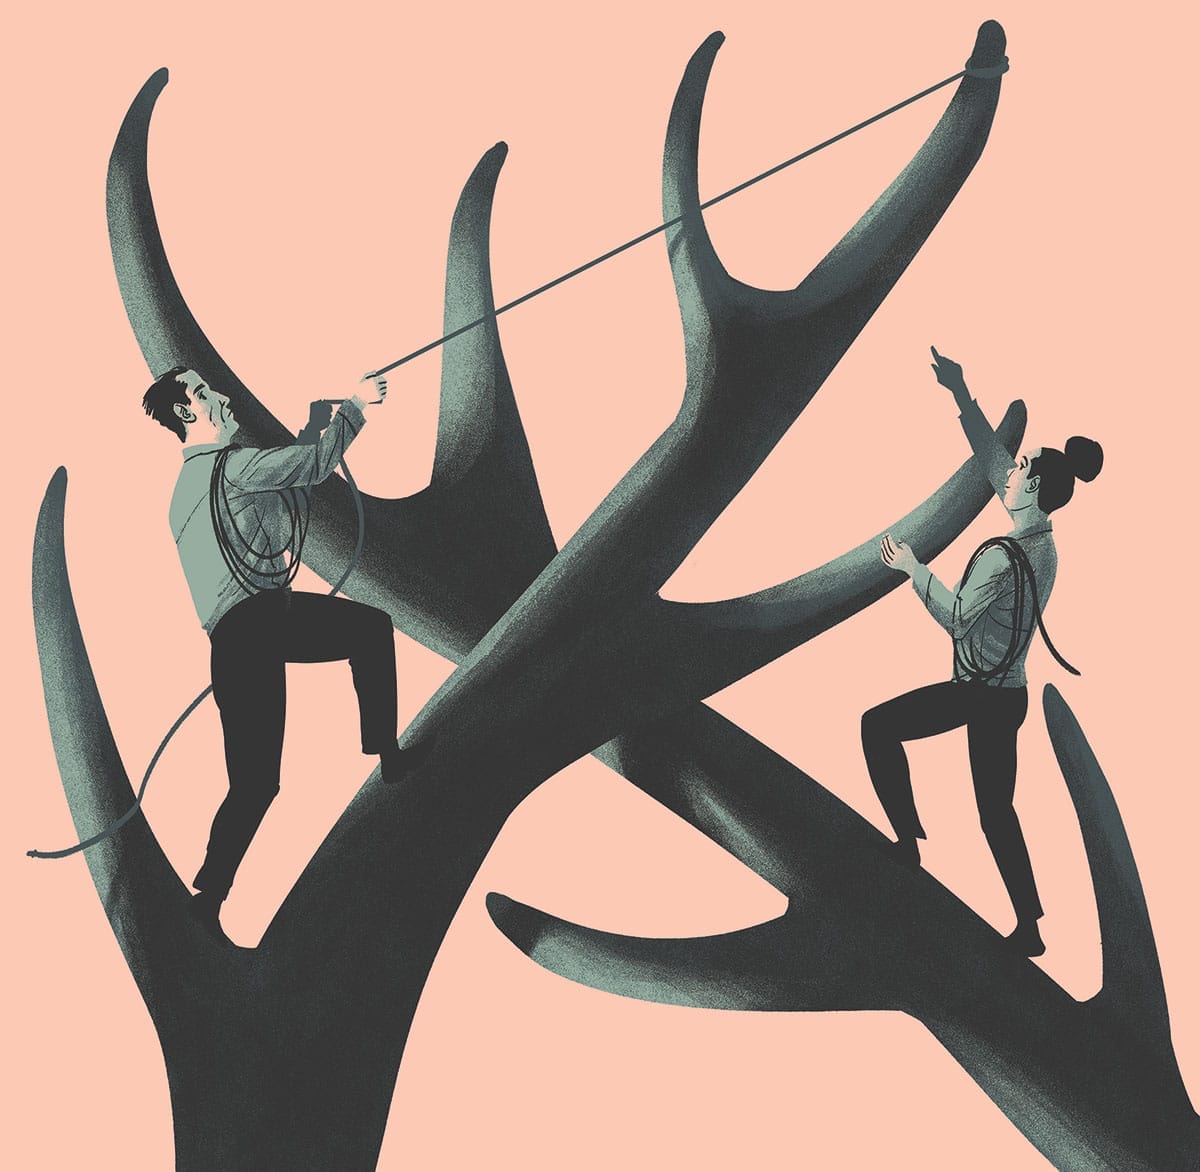 Decorative illustration of two people scaling a pair of antlers using climbing ropes.